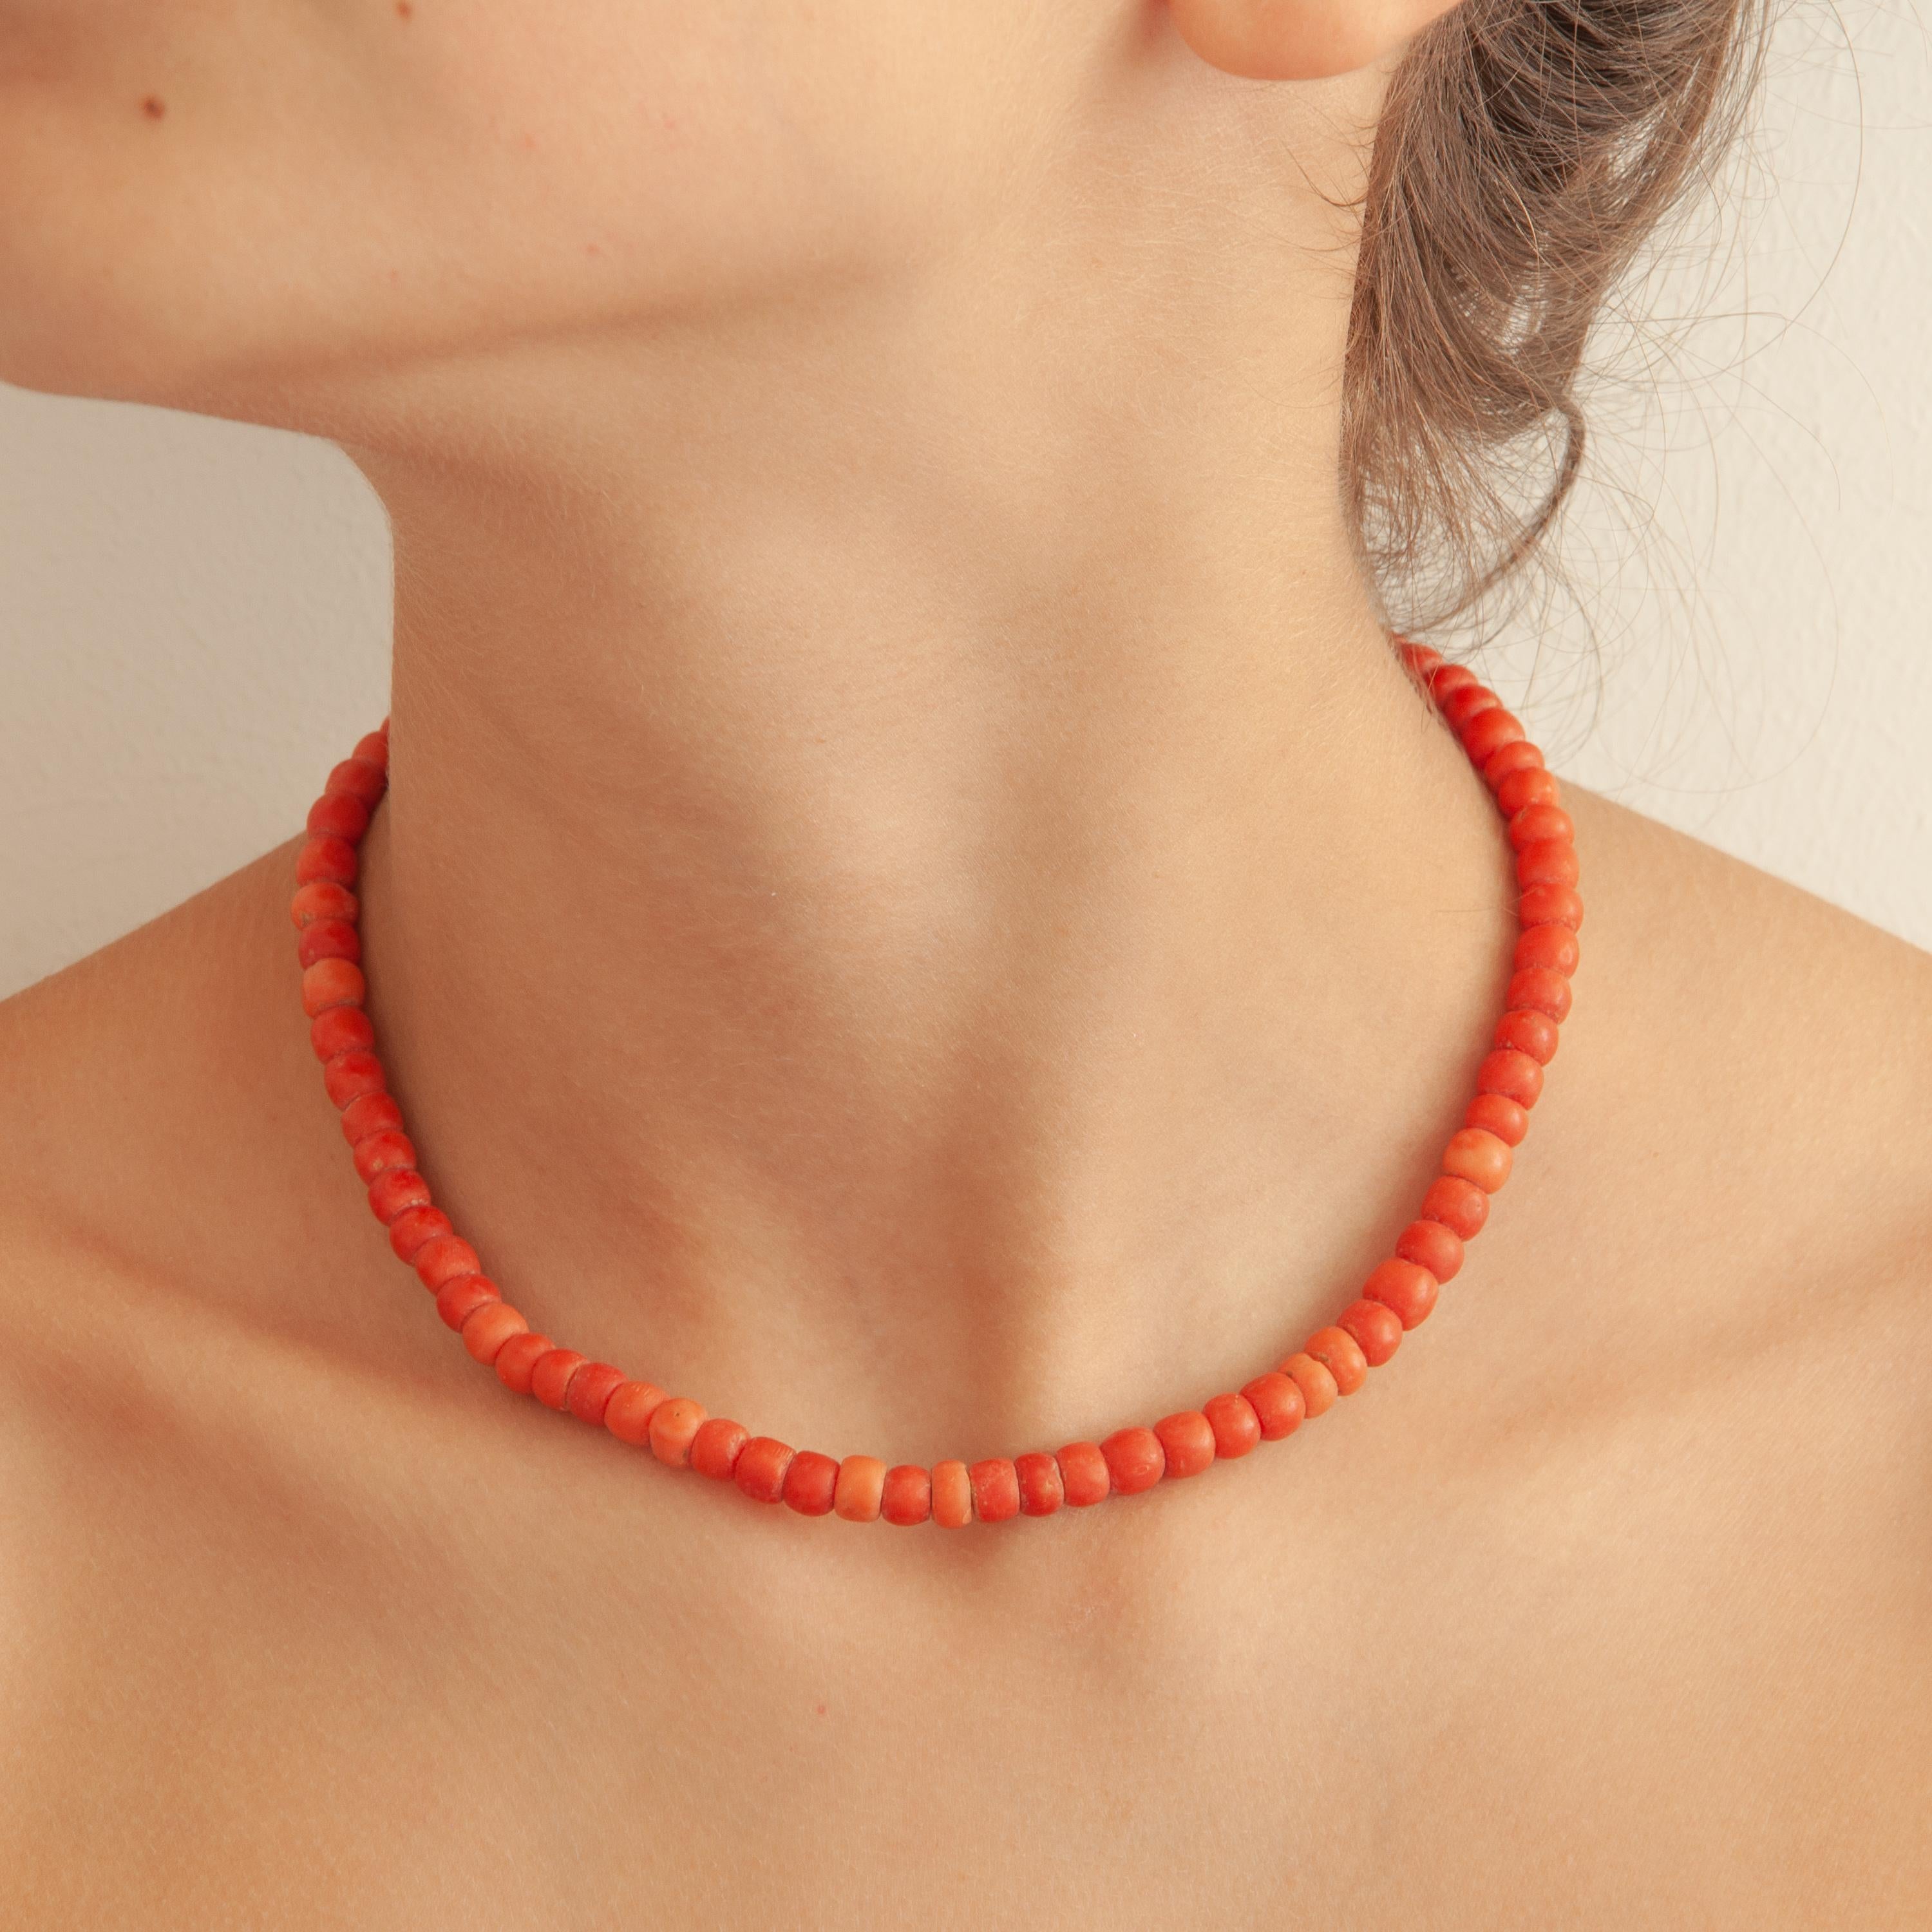 A gorgeous mid-century natural coral necklace set with a 14 karat gold clasp. The coral beads on this necklace are barrel-shaped and some differ slightly in color. The coral stones have a diameter of approximately 6 millimeters. The oval-shaped 14